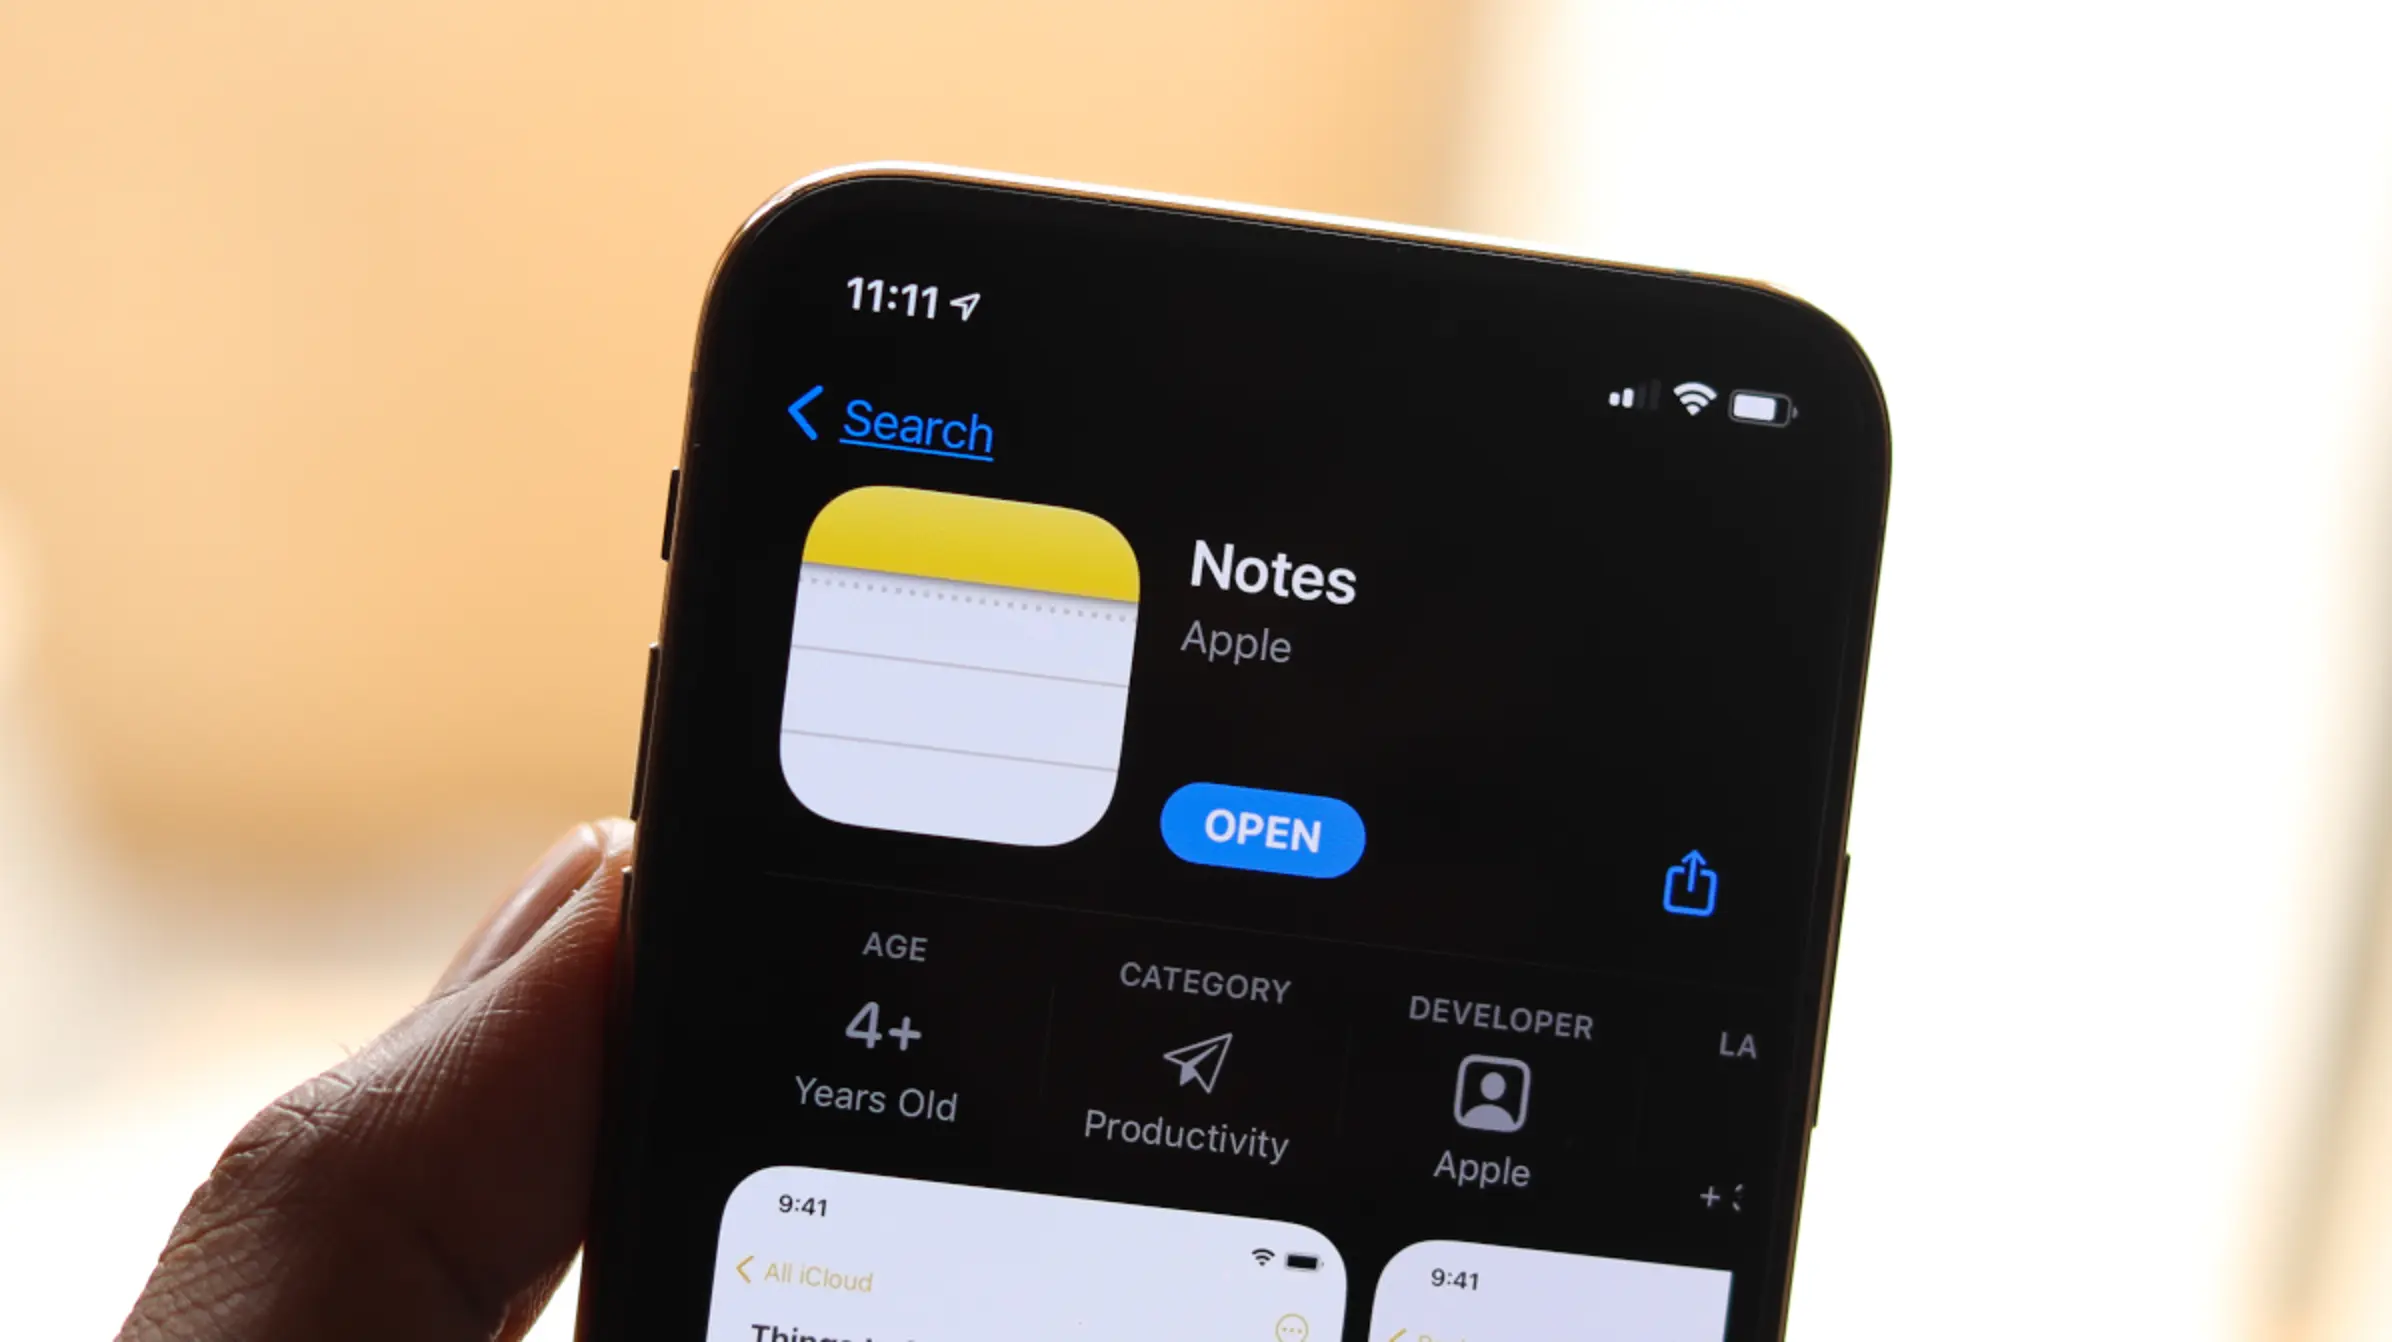 Notes app disappeared from iPhone